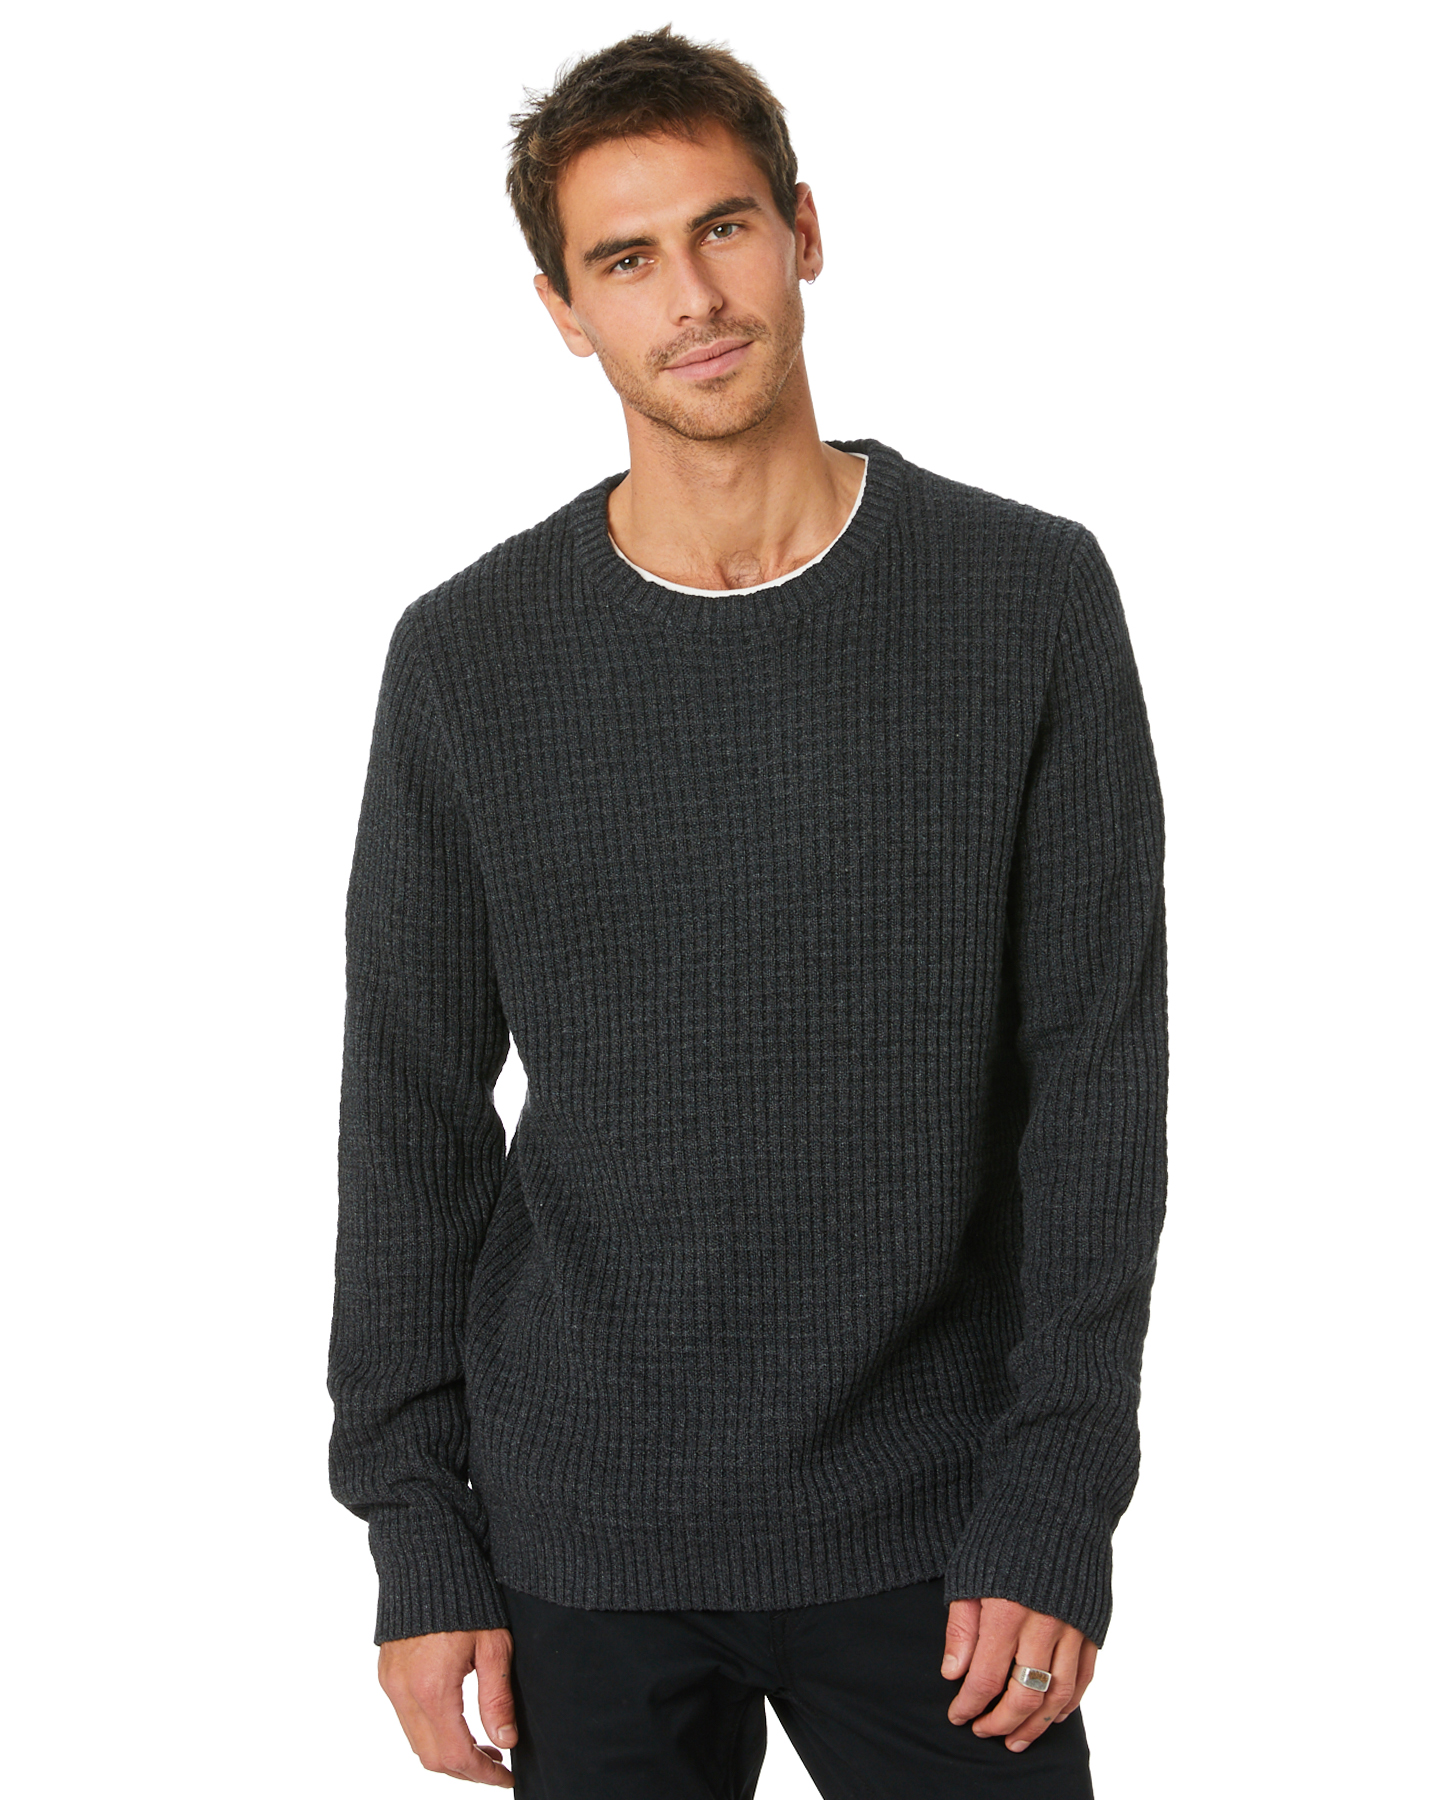 Rusty Miserable Mens Crew Neck Knit - Black Marle | SurfStitch